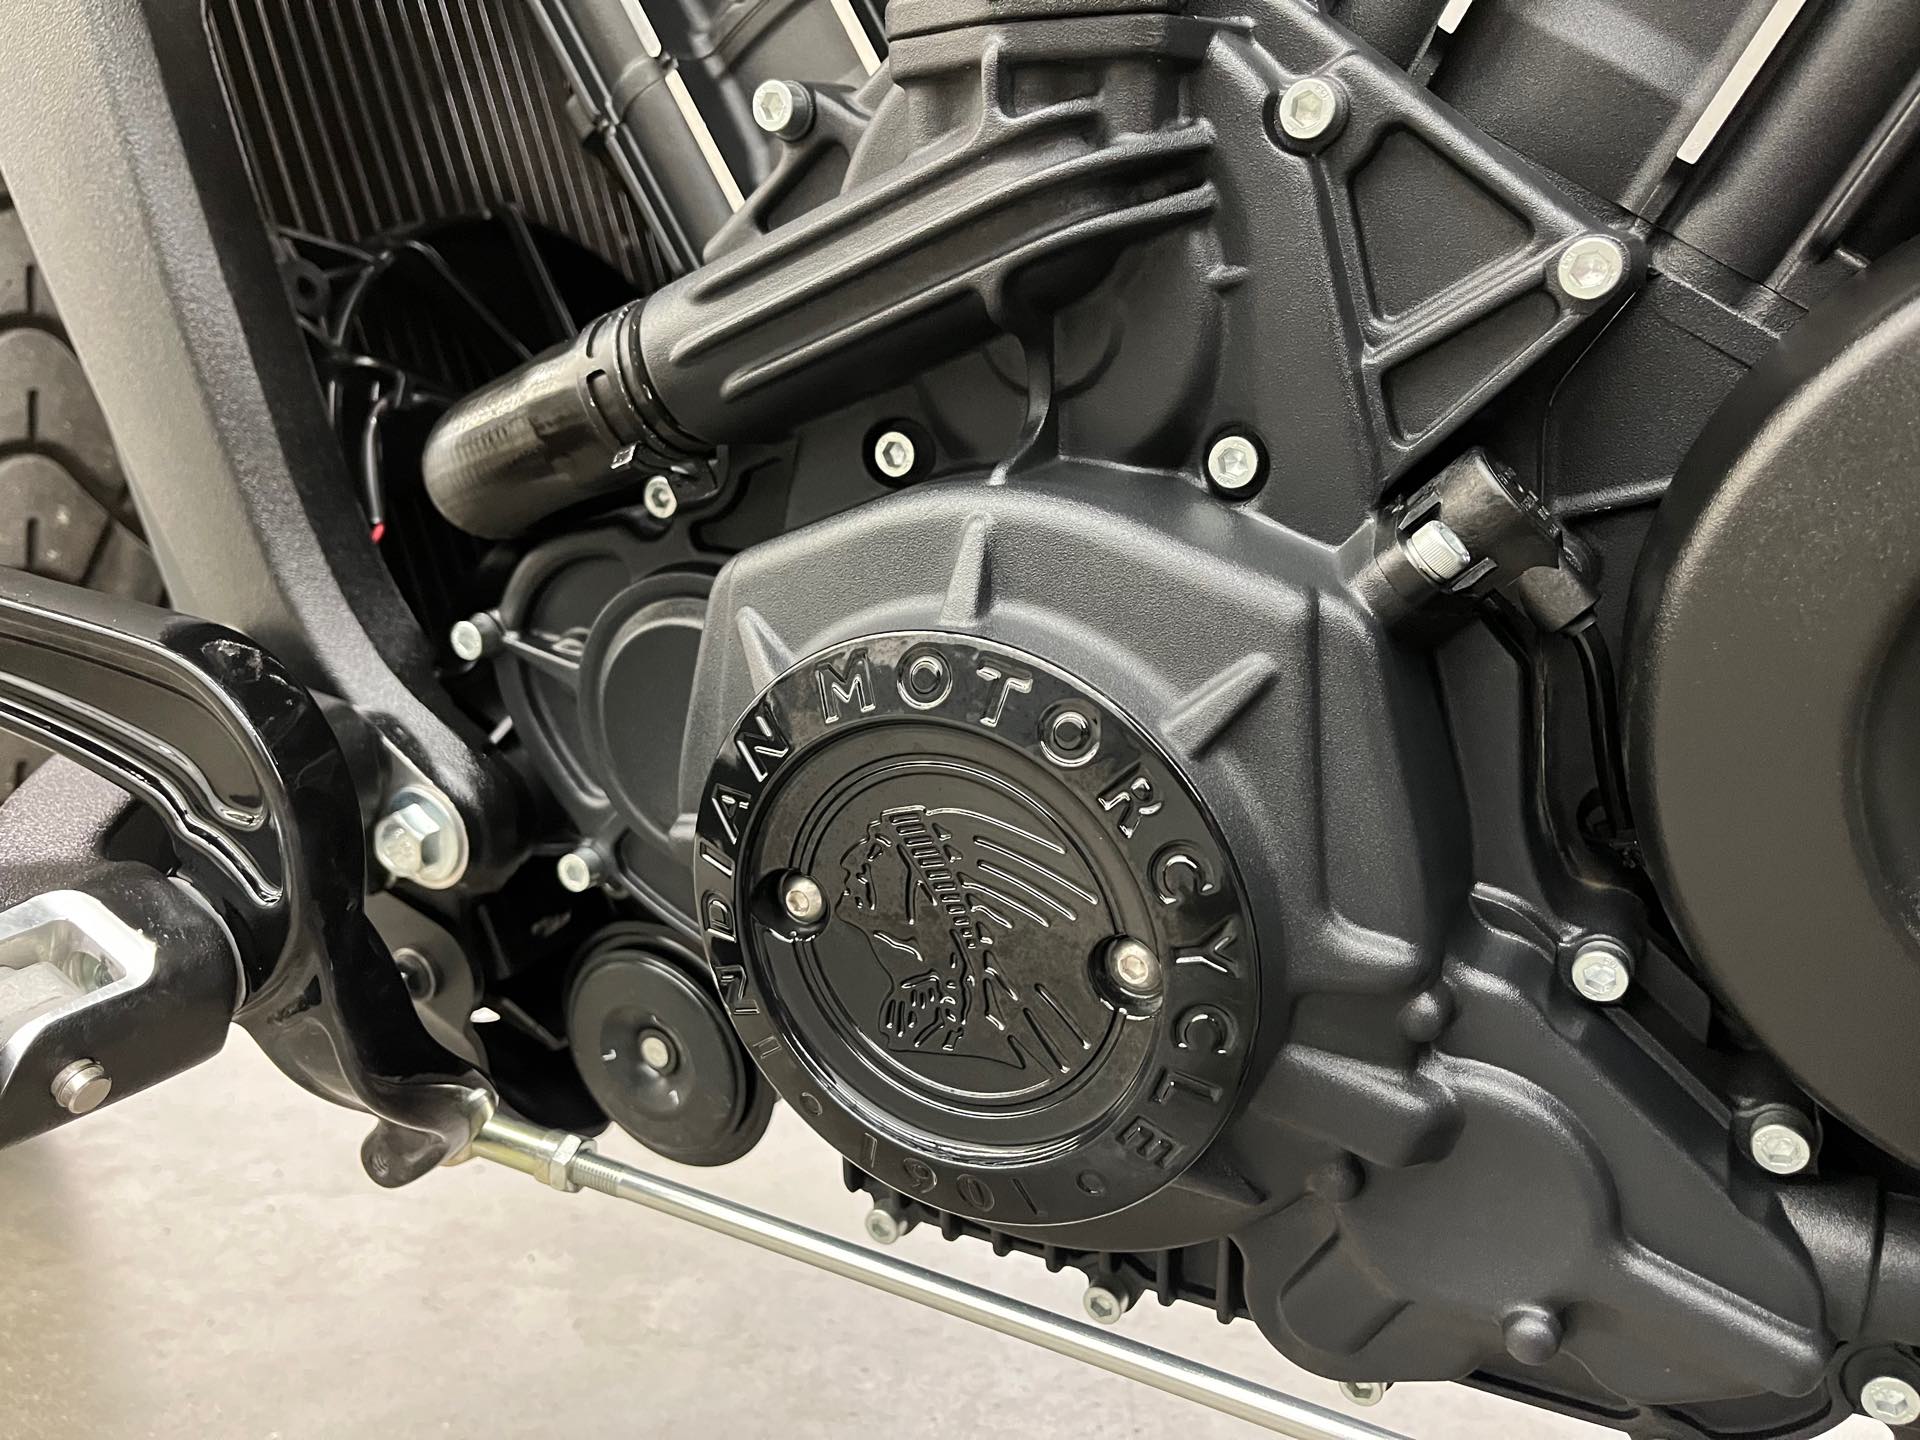 2019 Indian Motorcycle Scout Base at Aces Motorcycles - Denver